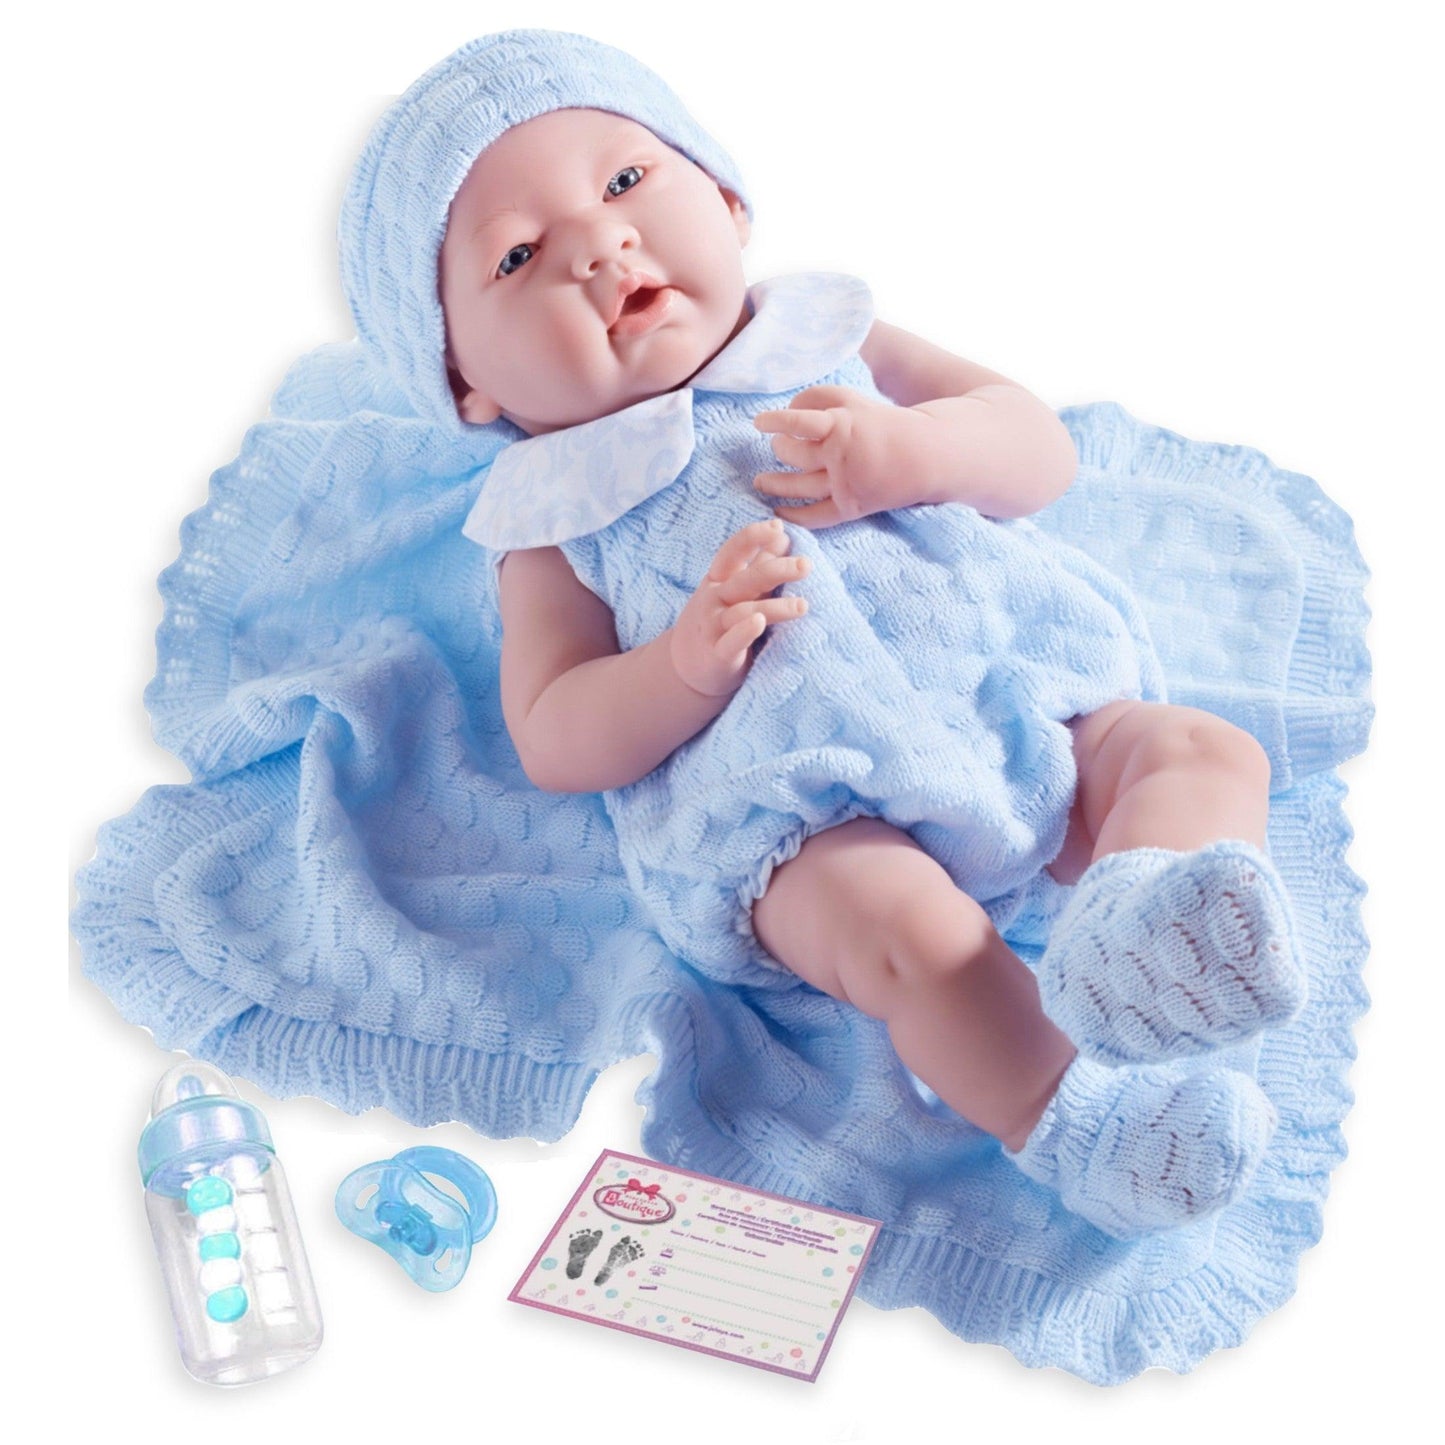 JC Toys, La Newborn All Vinyl Real Boy 15in Baby Doll in Blue Knit Outfit - JC Toys Group Inc.